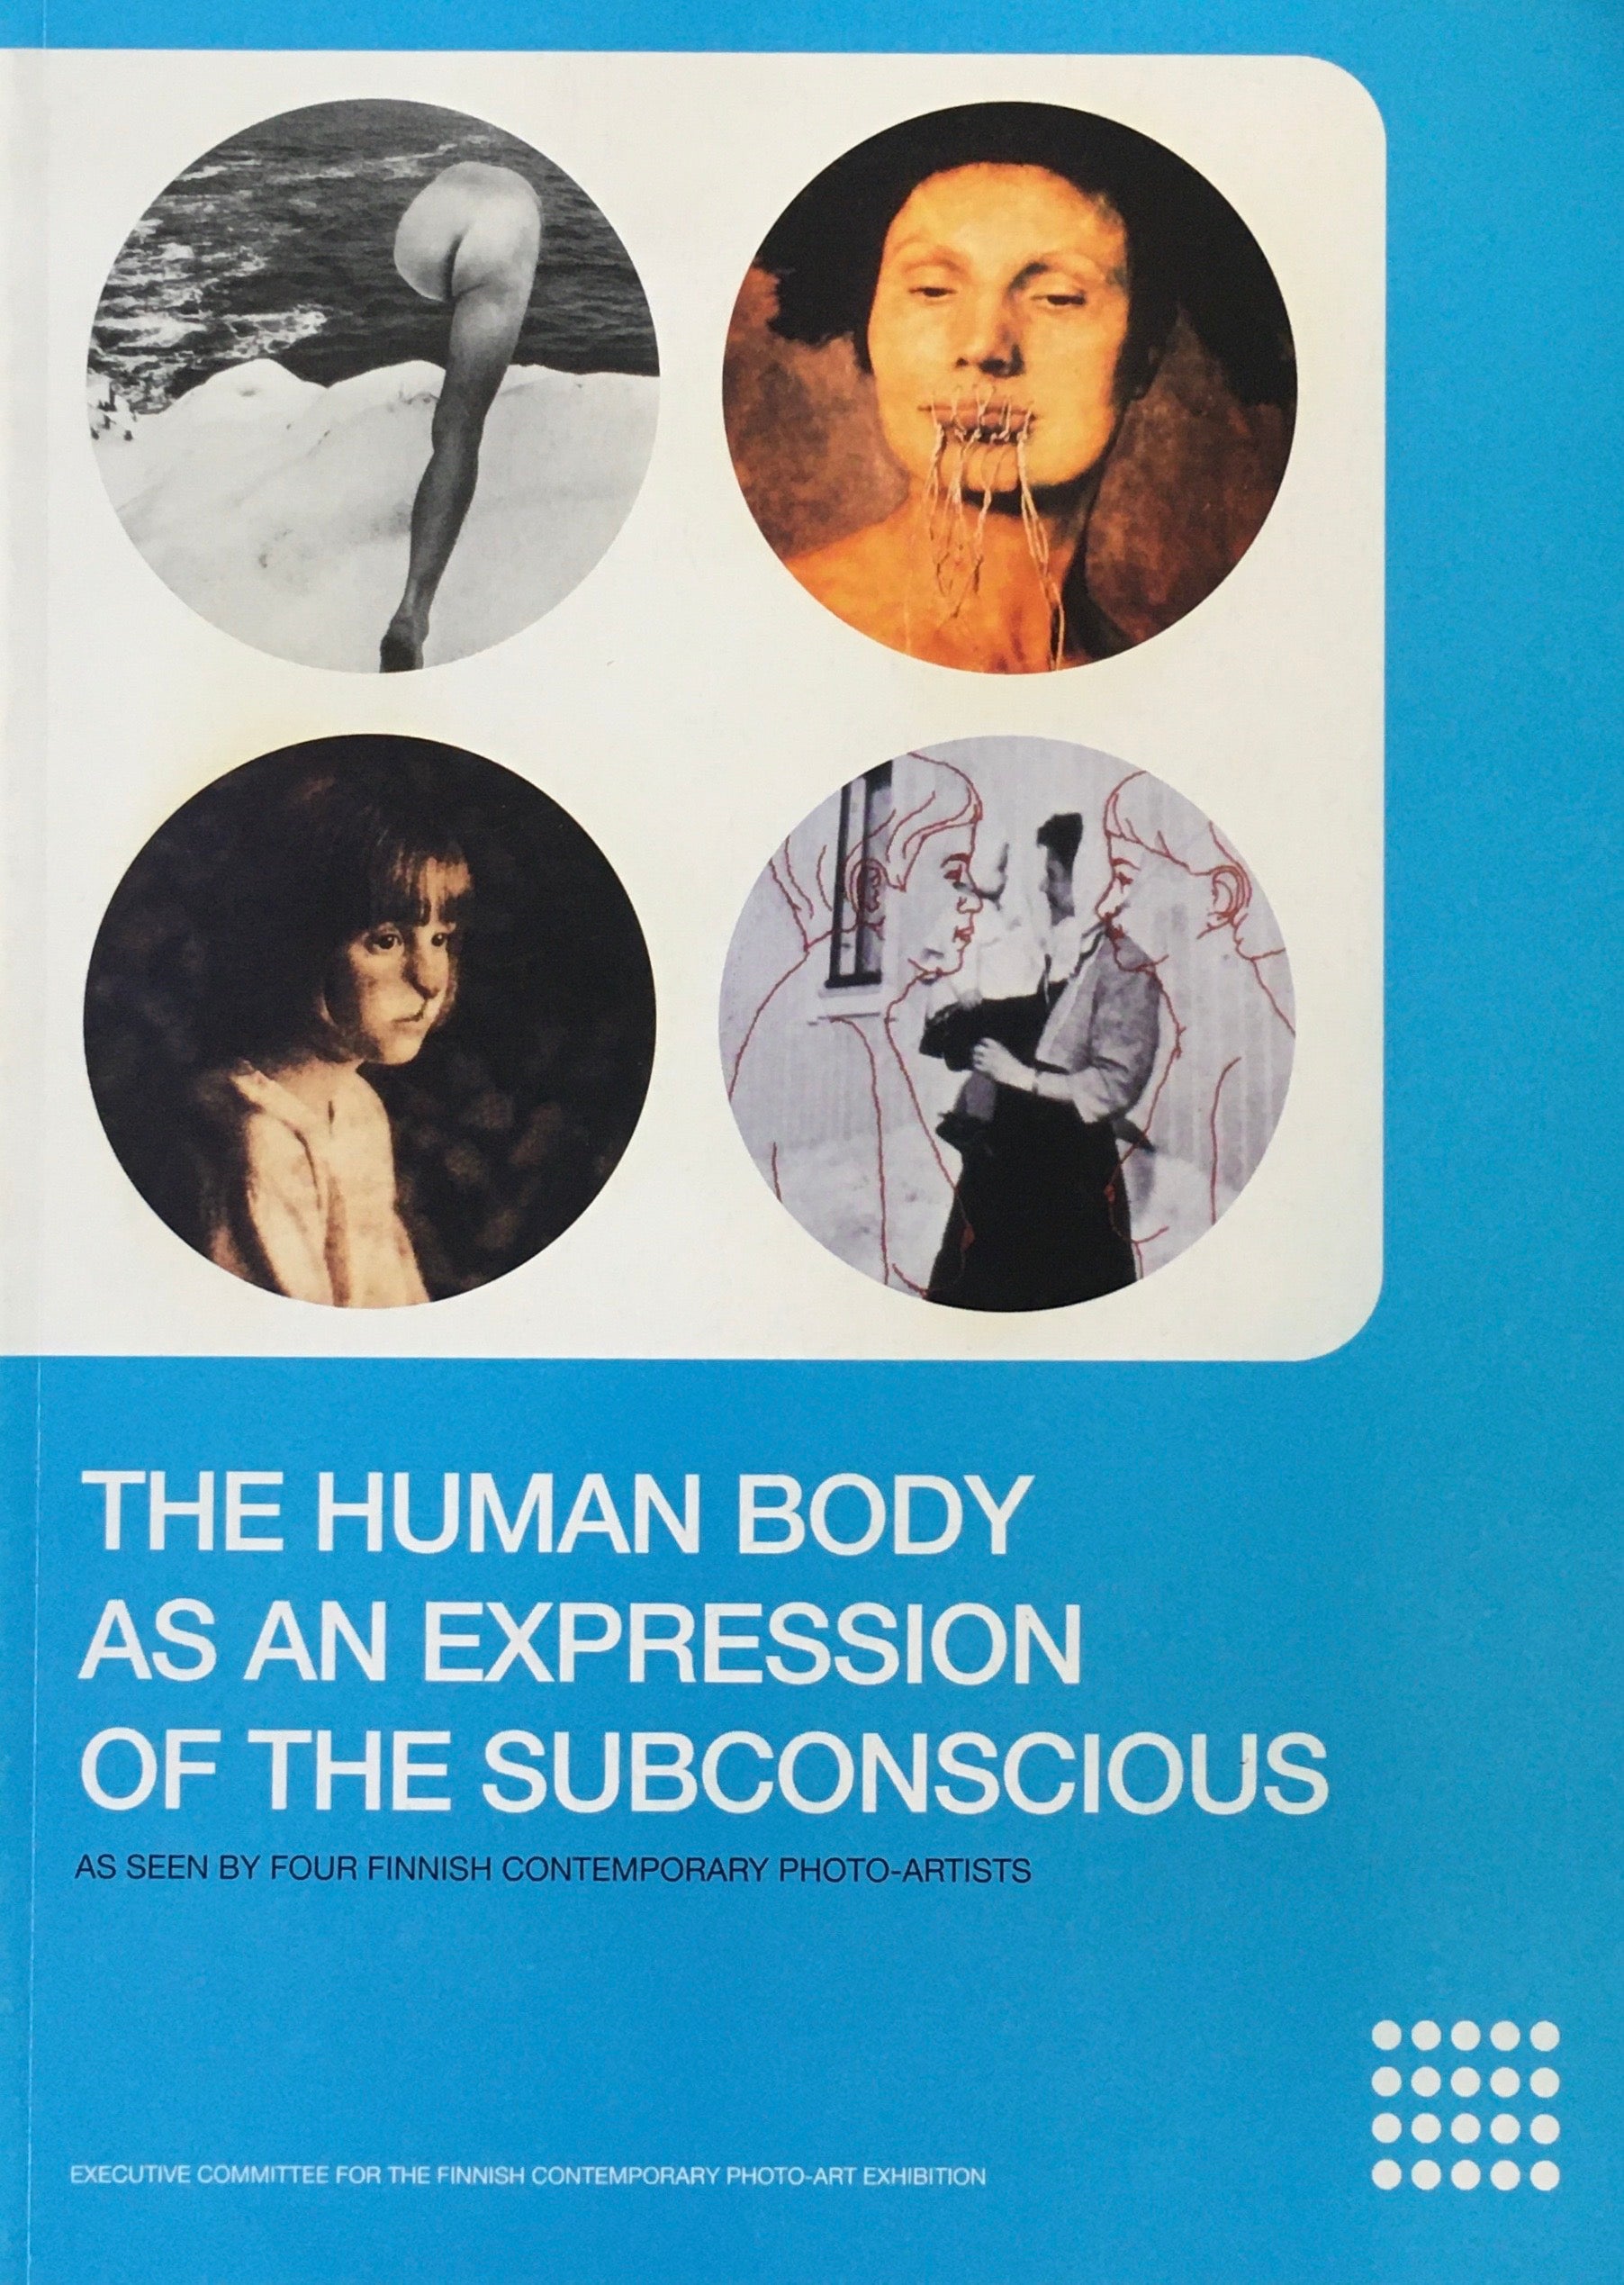 THE　AS　SUBCONSCIOUS　smokebooks　AN　–　HUMAN　OF　滞在意識の発露として、写真をイメージ　THE　shop　BODY　EXPRESSION